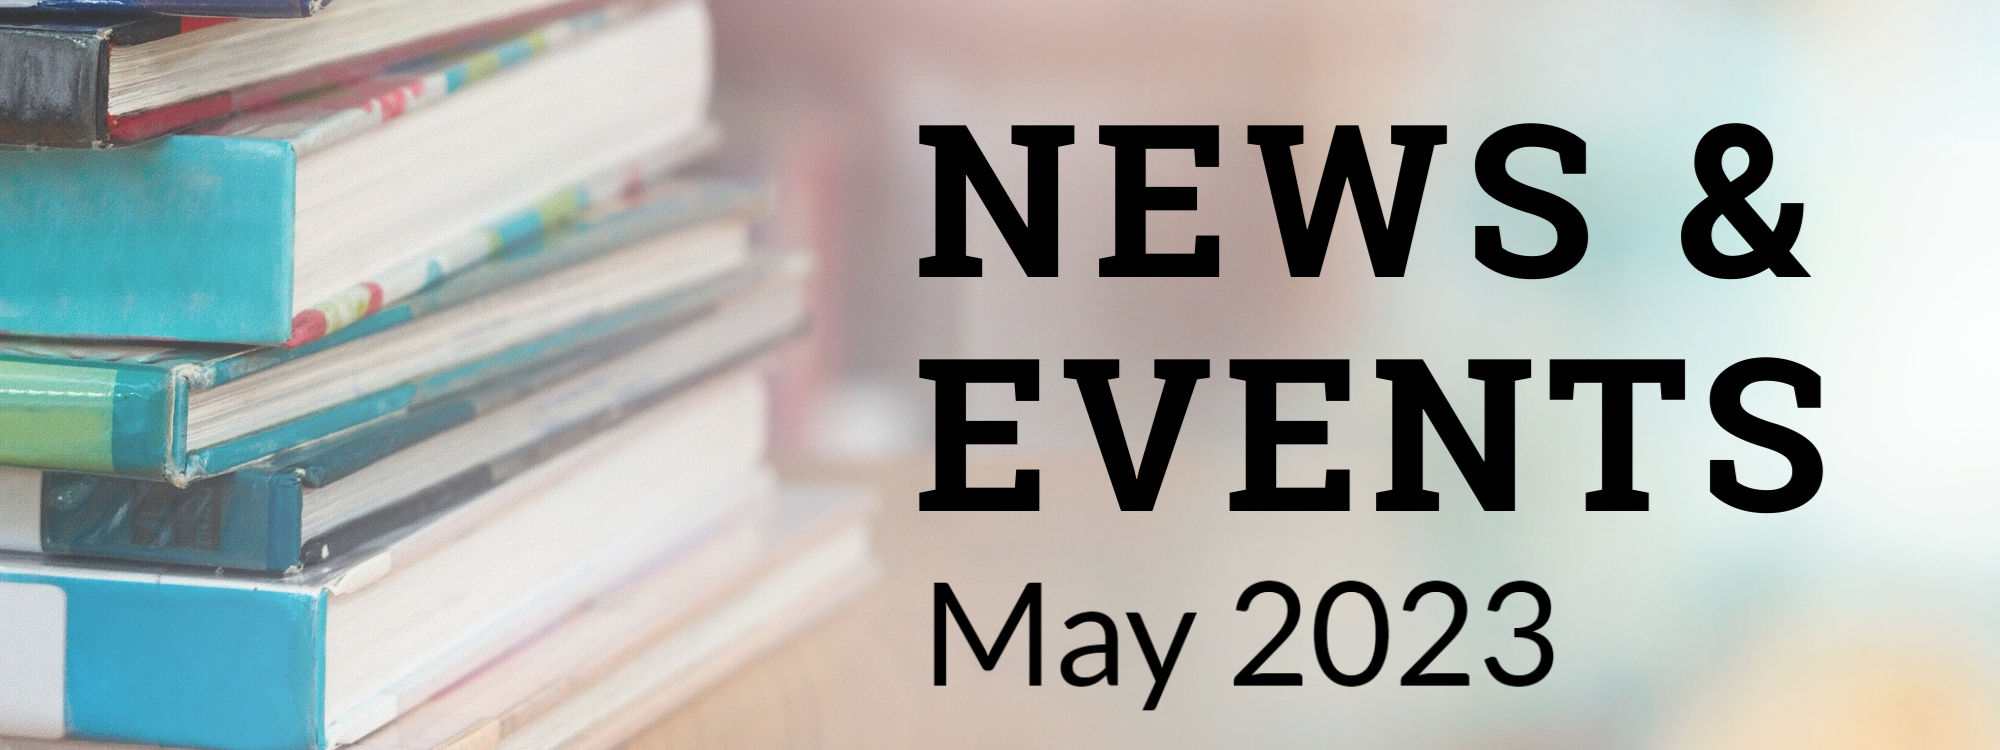 Library News & Events